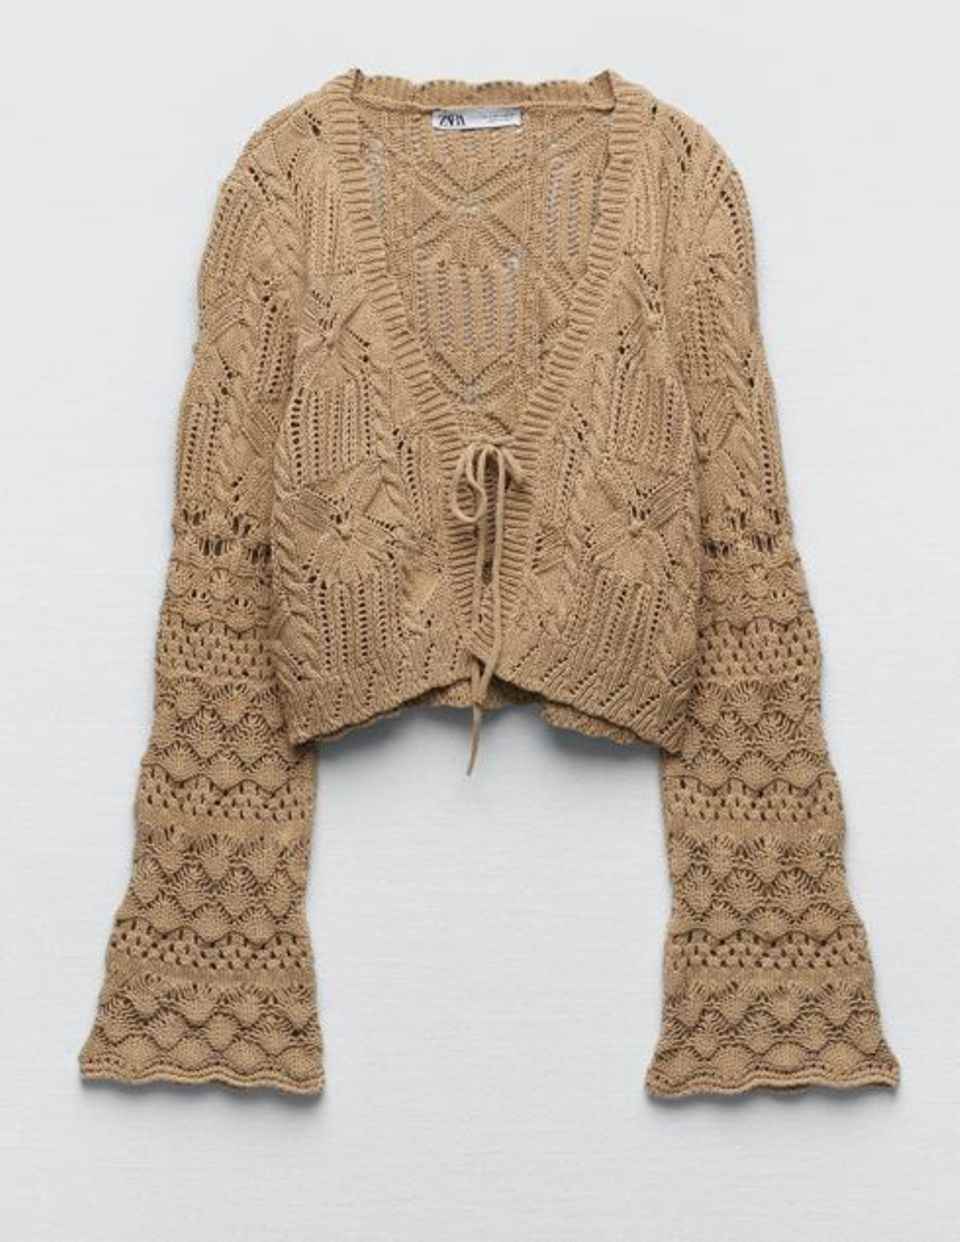 Embroidered jacket with a bow from Zara, around 40 euros.